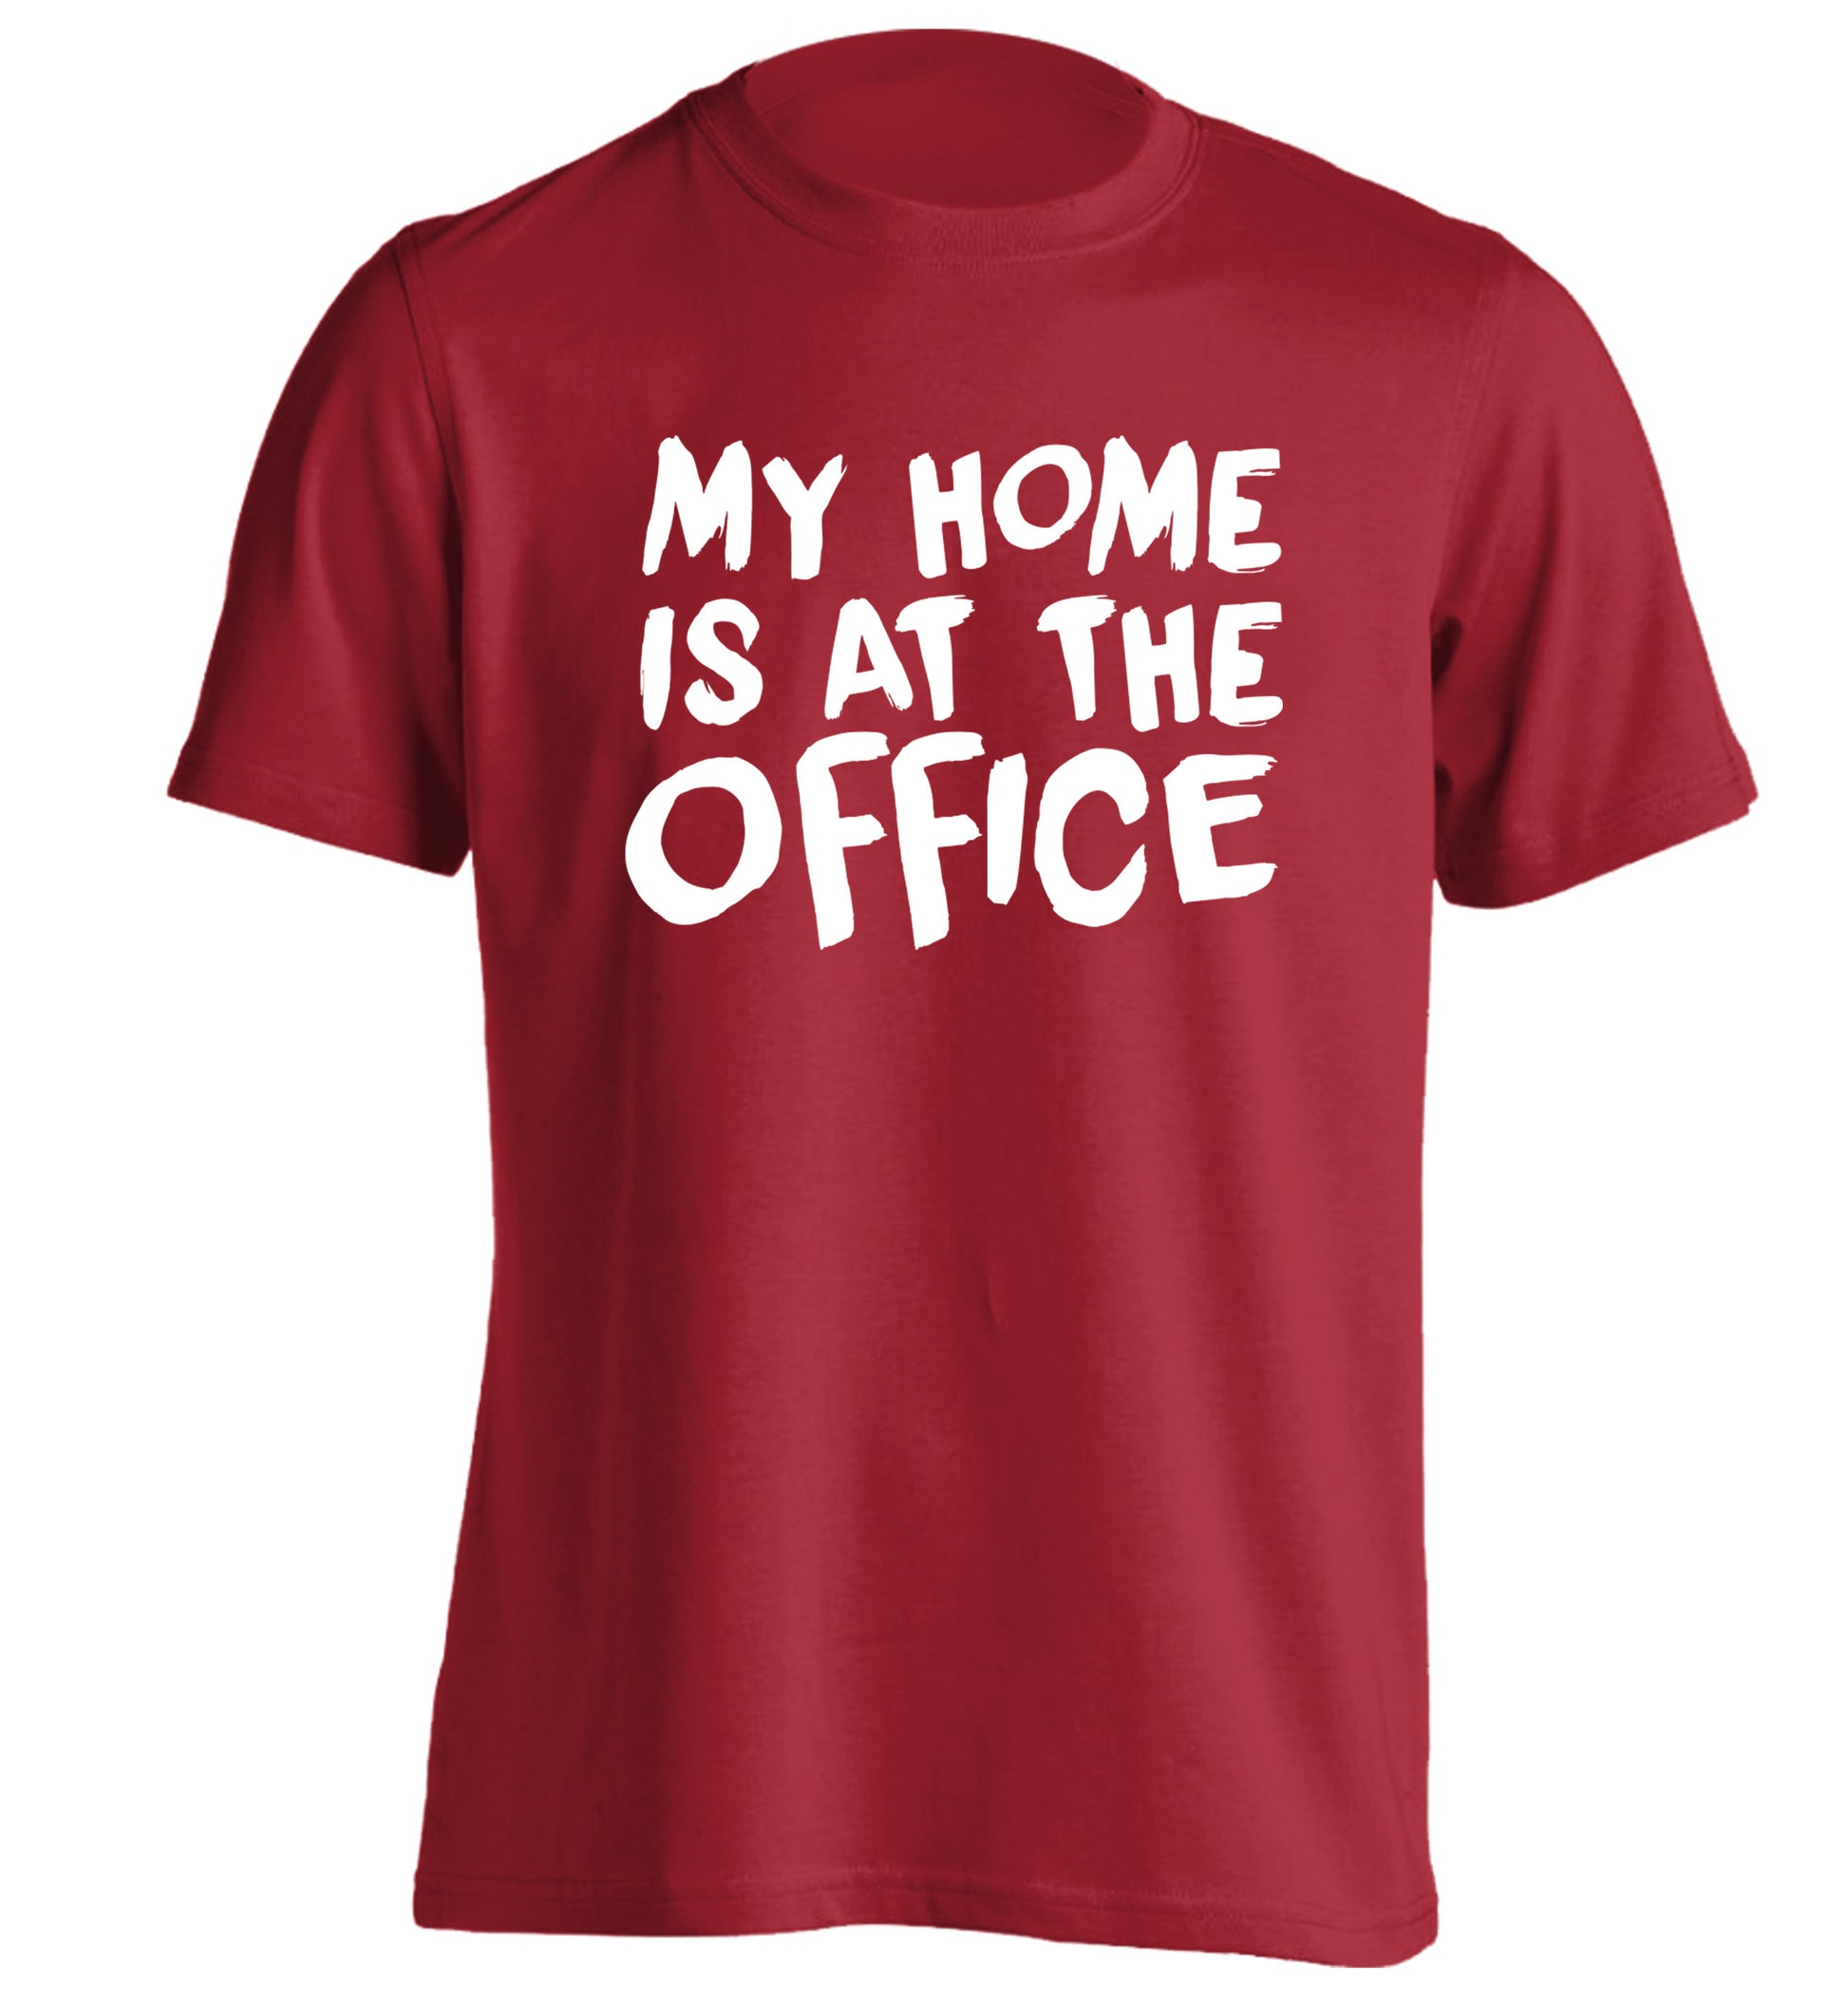 My home is at the office adults unisex red Tshirt 2XL